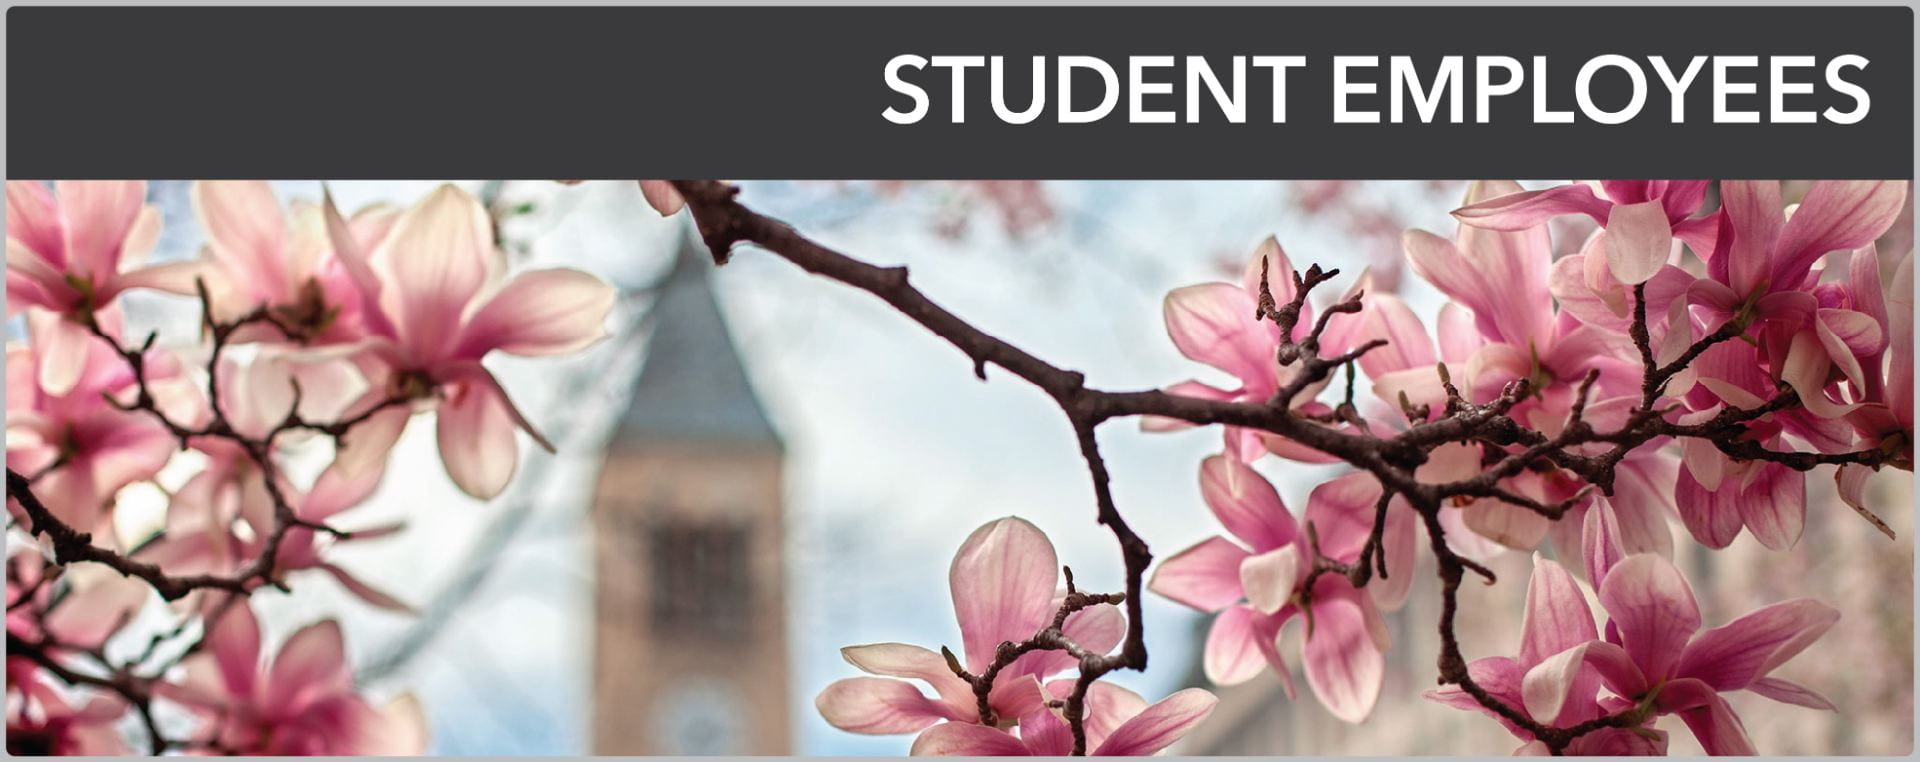 Student employee banner with link to page